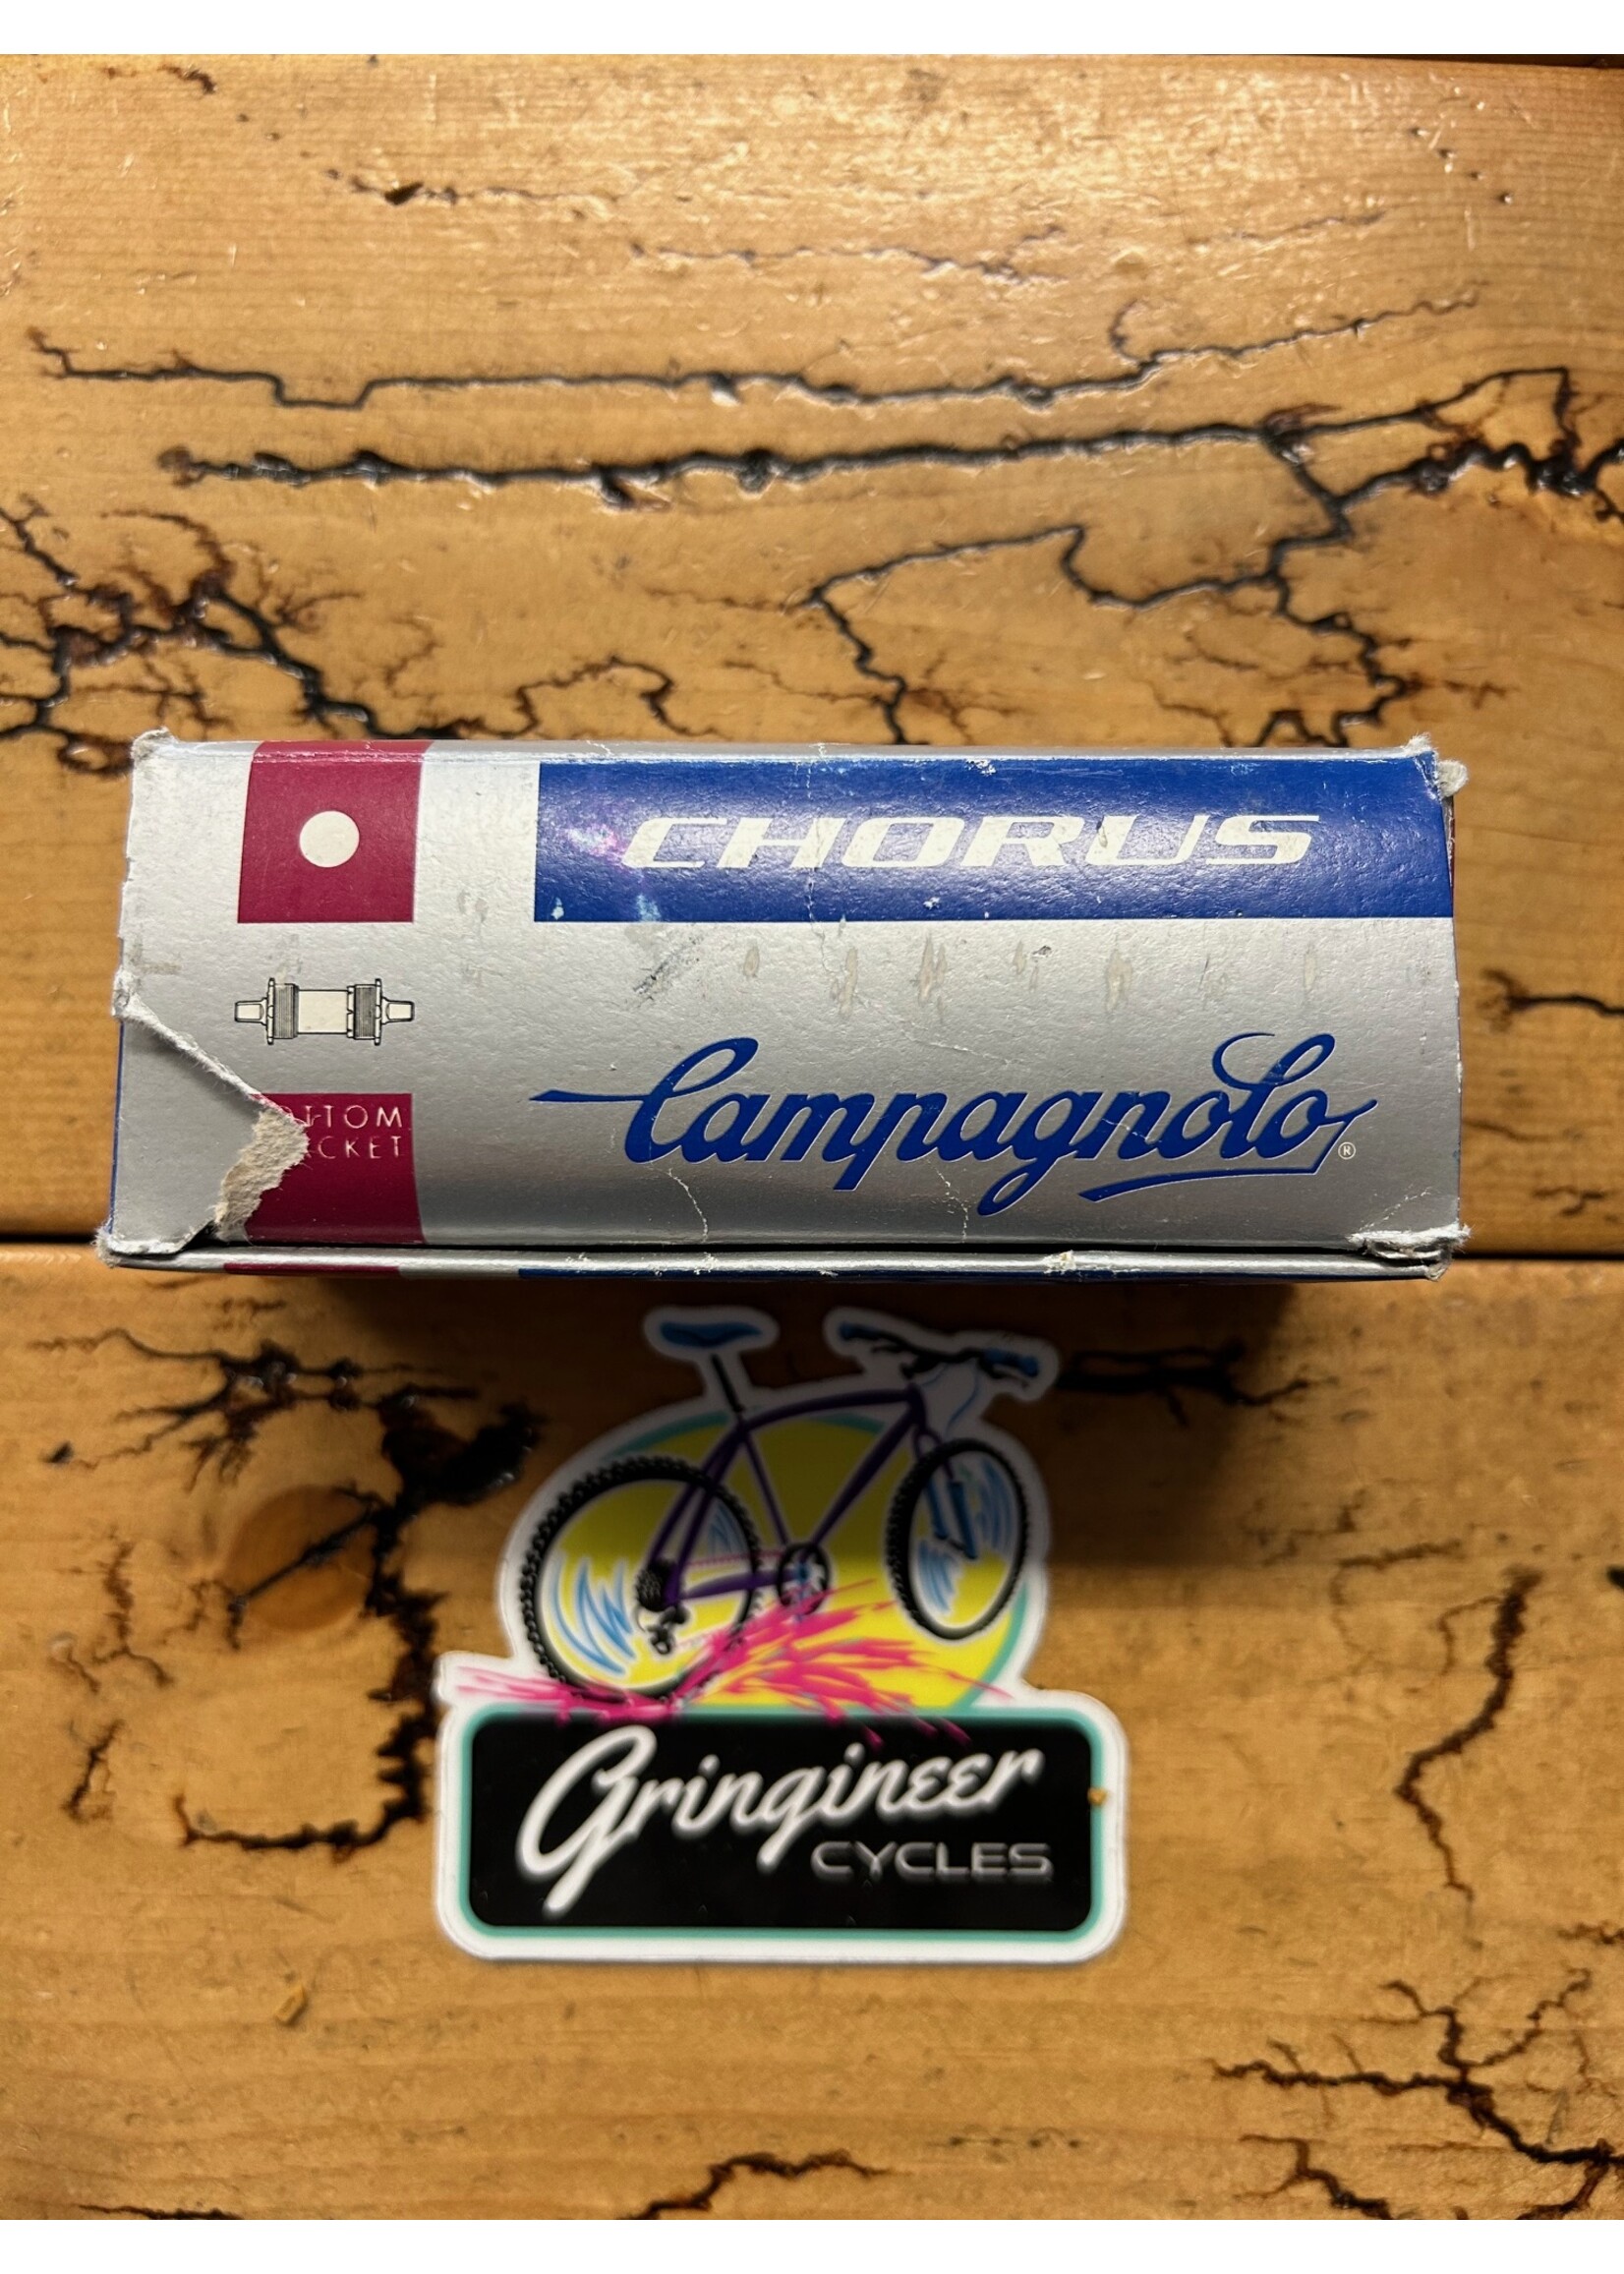 Campagnolo Campagnolo Chorus 102mm English Threaded Square Taper Bottom Bracket NOS